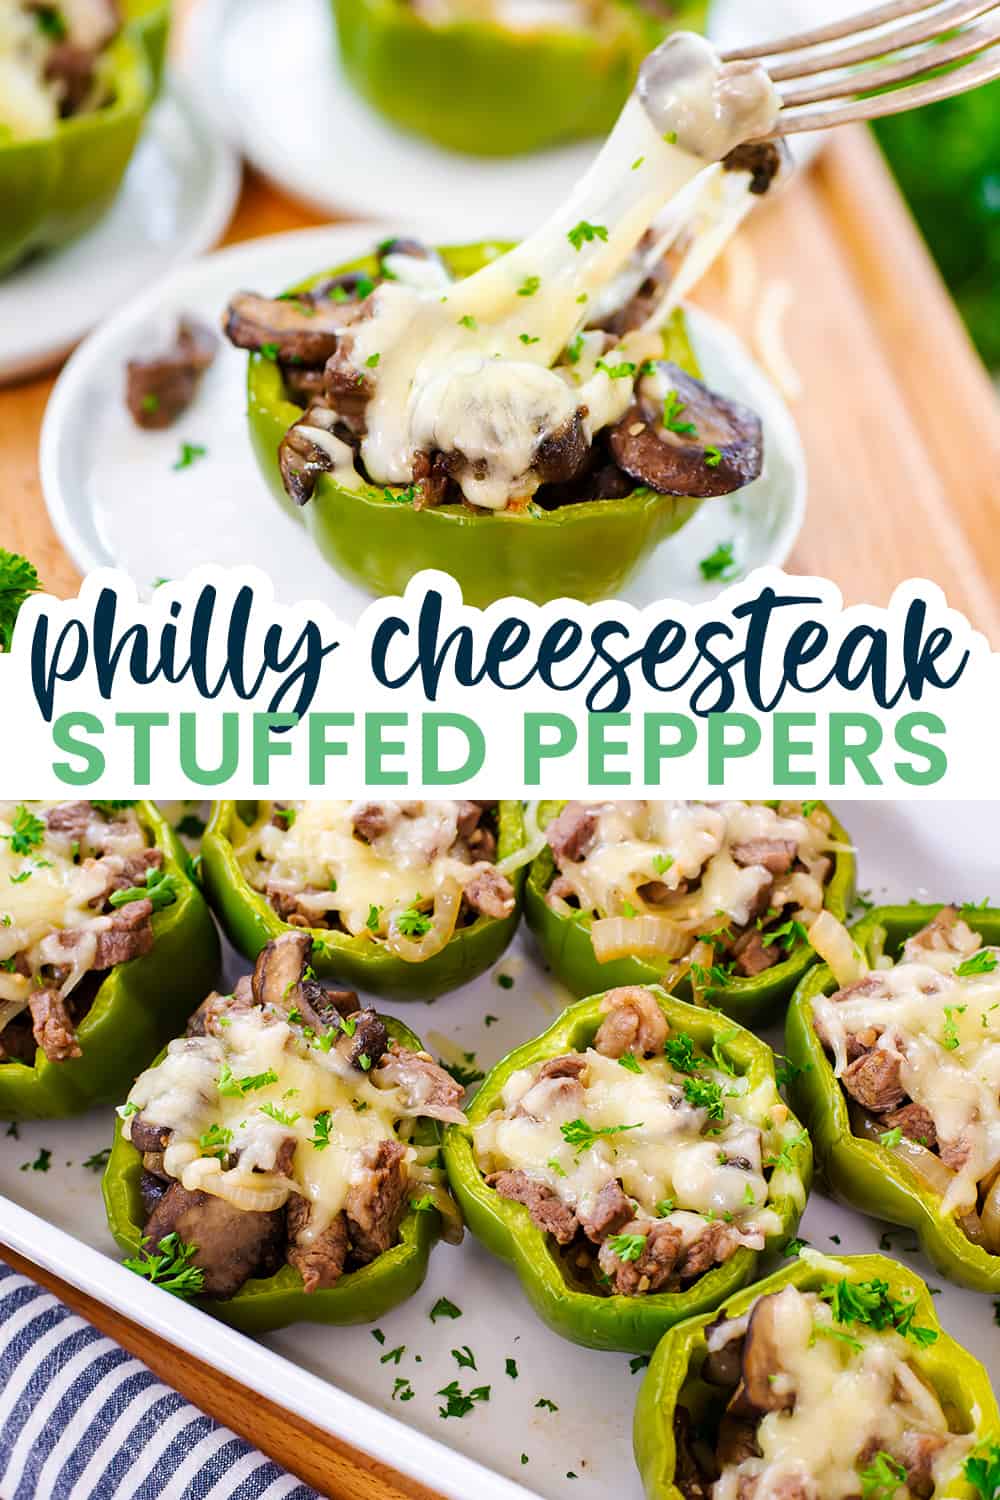 Collage of stuffed pepper images.